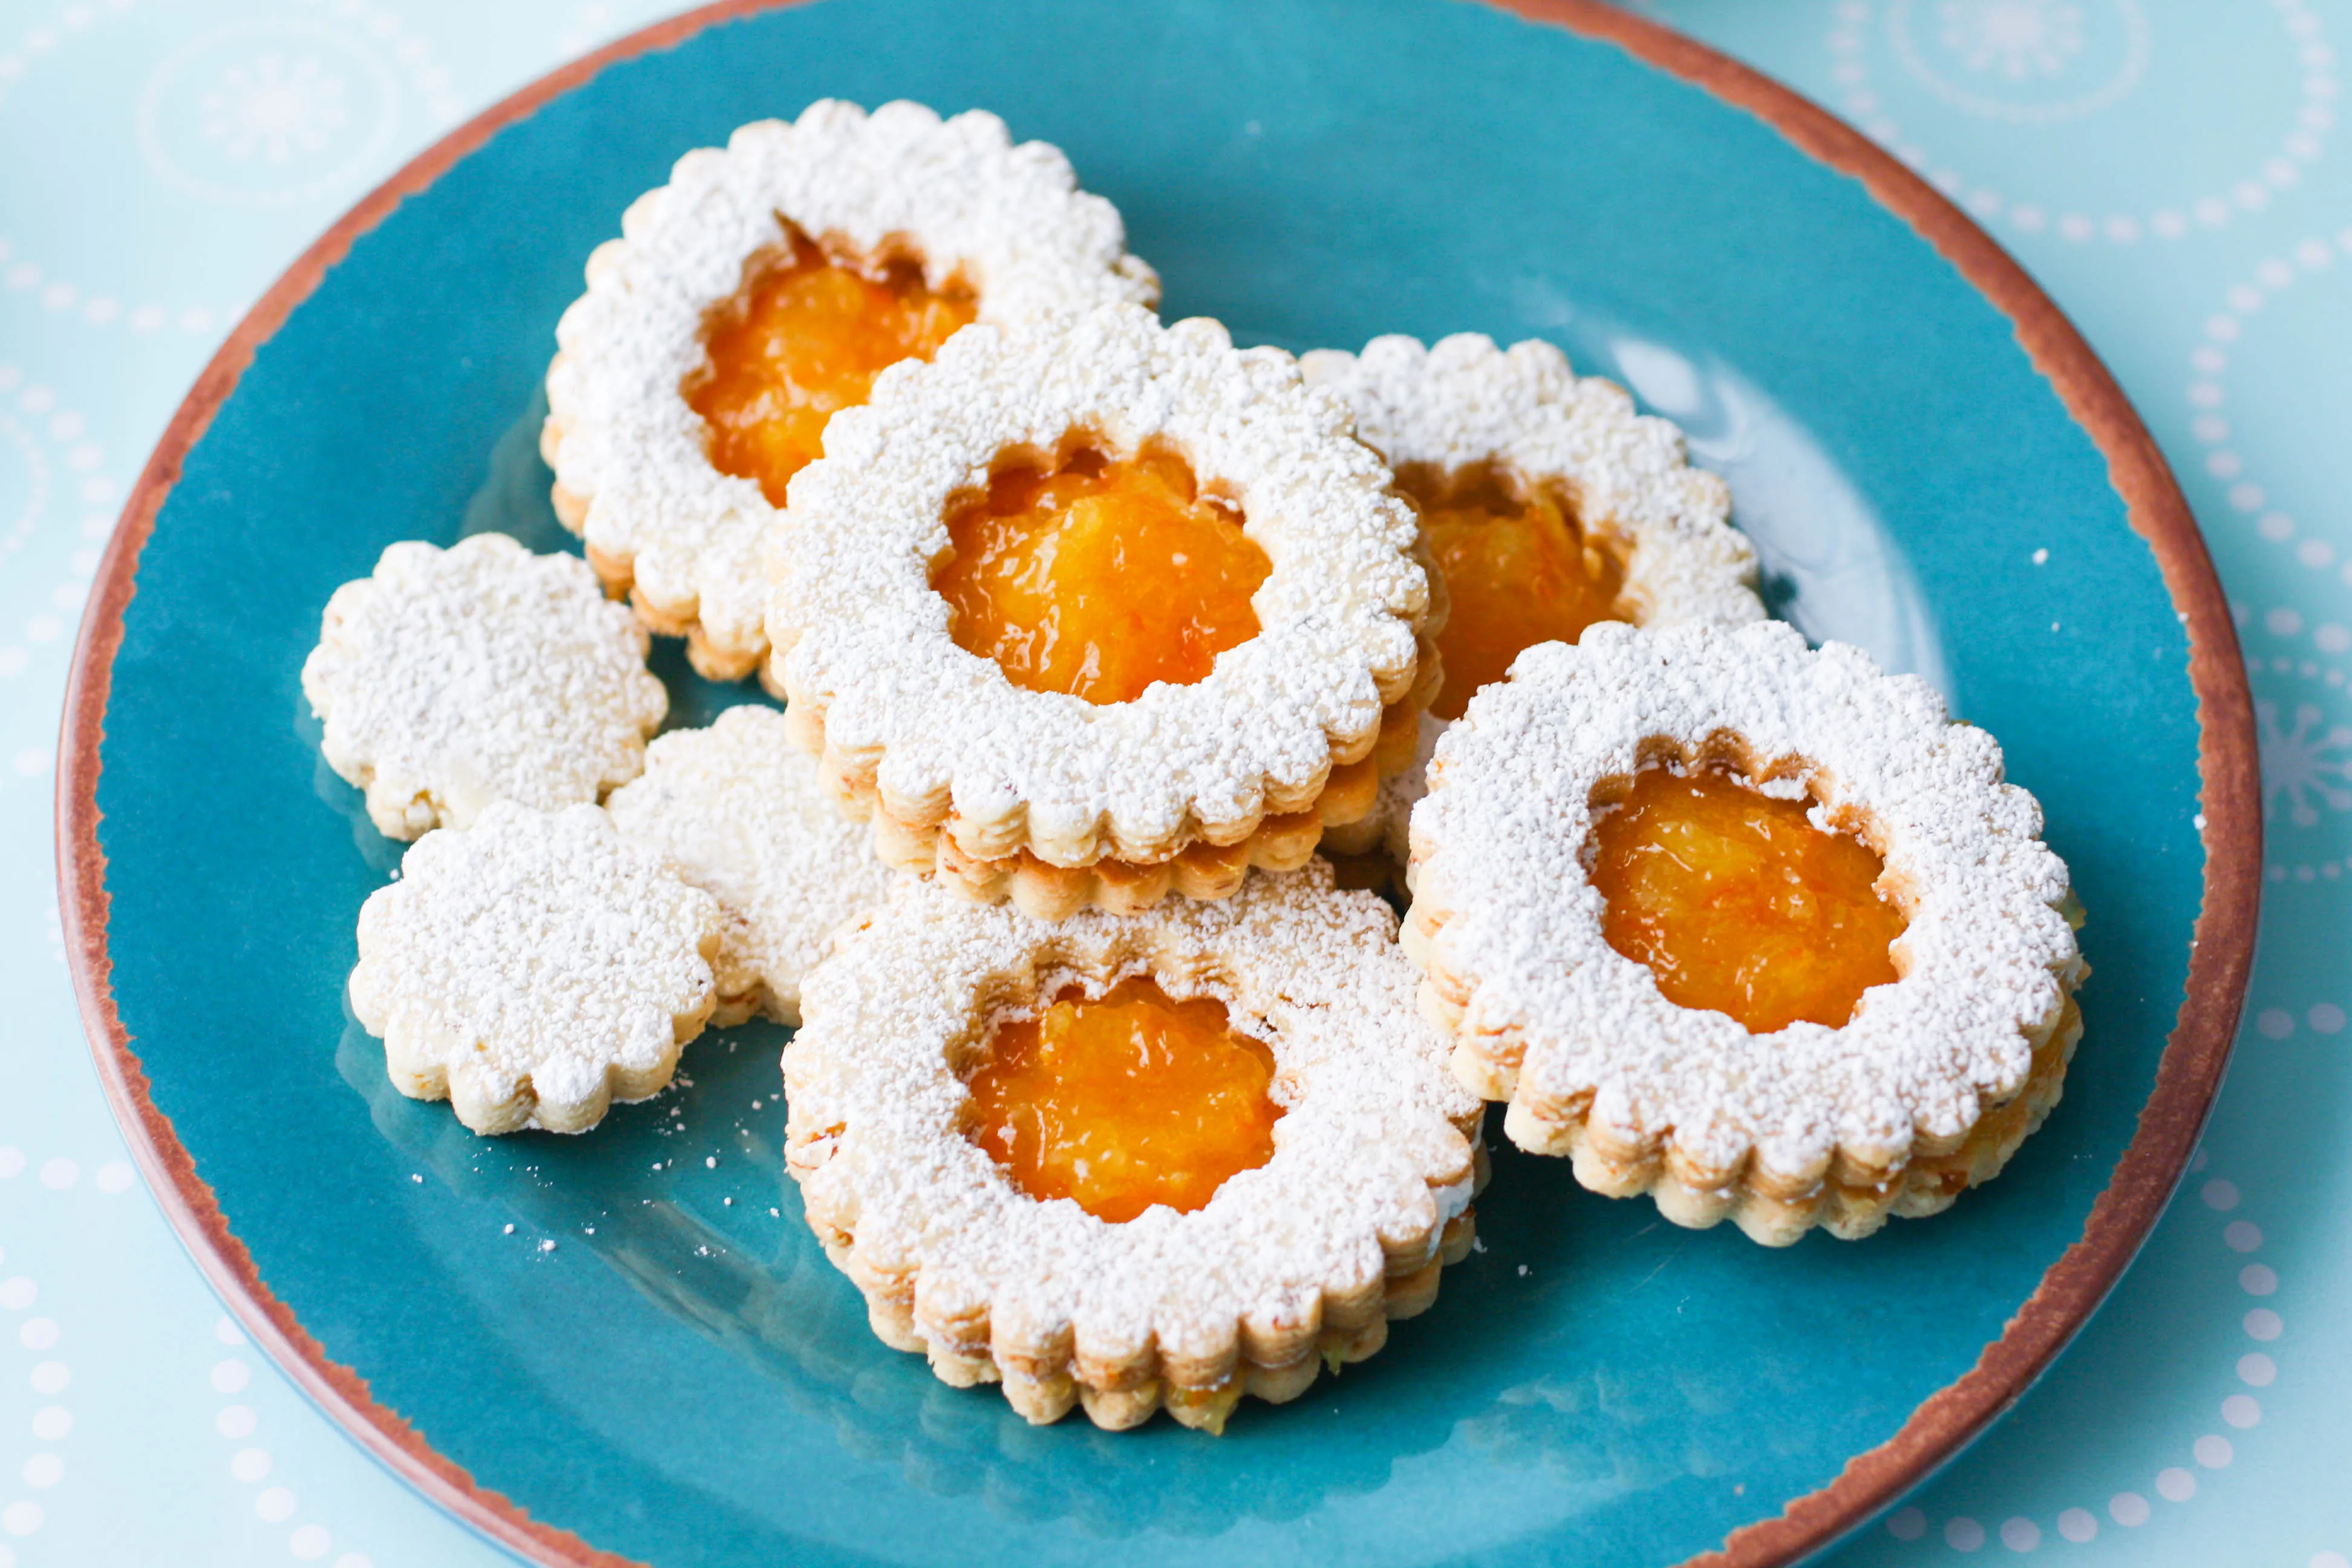 Linzer Cookies with Homemade Orange Marmalade are quite a treat for the season. You'll enjoy making and eating these lovely linzer cookies!